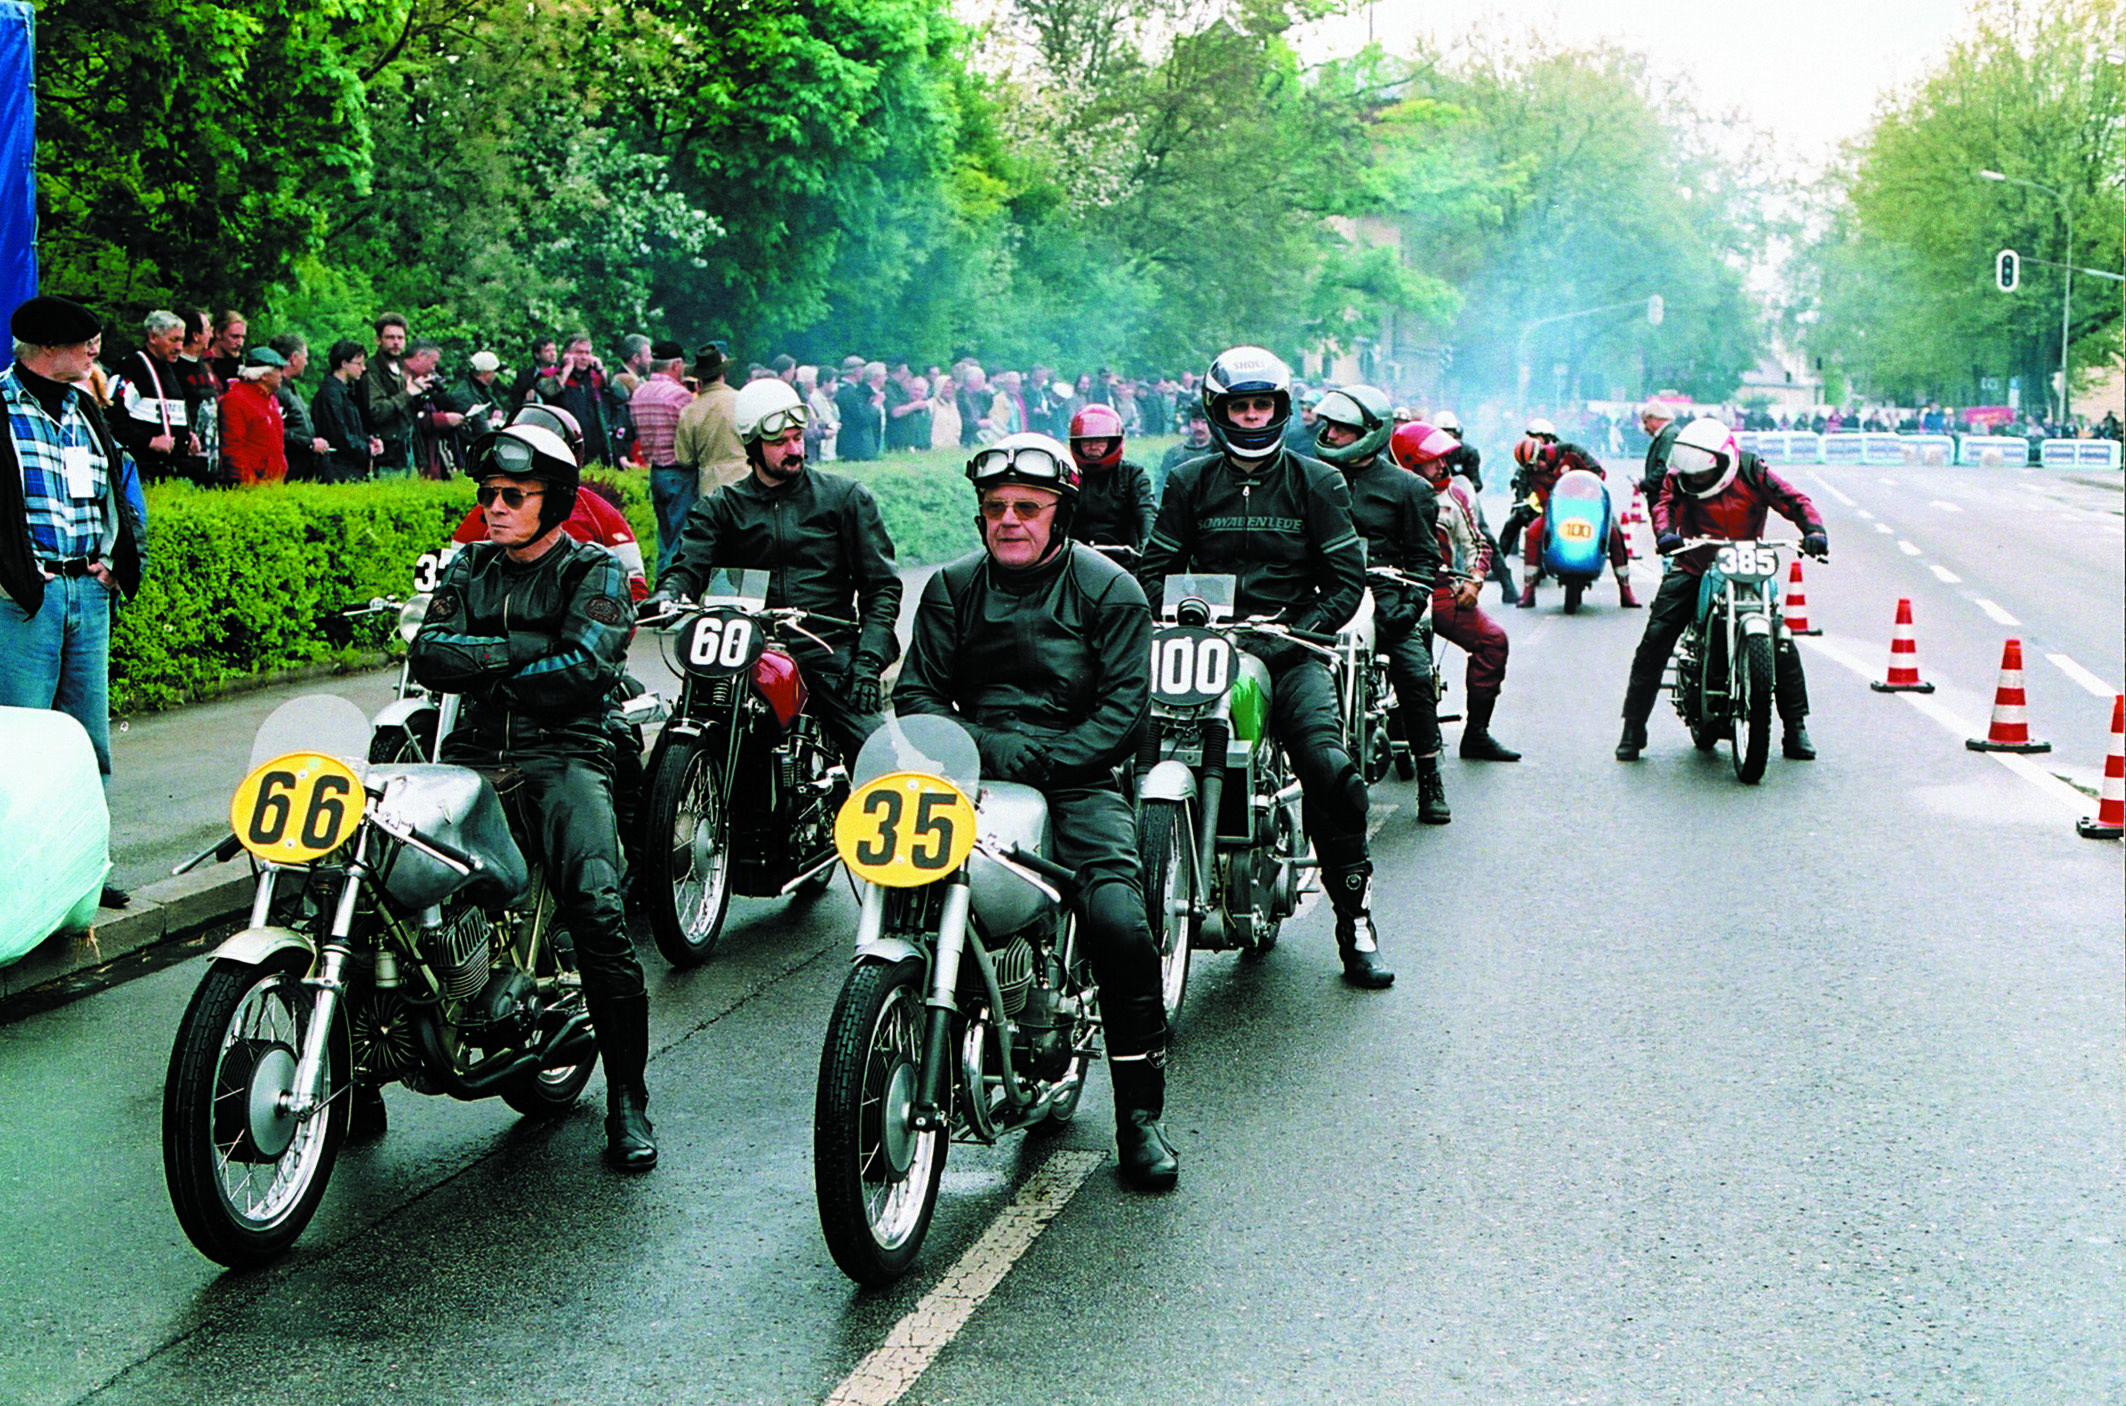 Donau Ring Race 2002: As in 1999 and 2000, genuine motorcycle rarities will be lining up at the start of a 1.6 kilometre city circuit in Ingolstadt on 4 and 5 May 2002